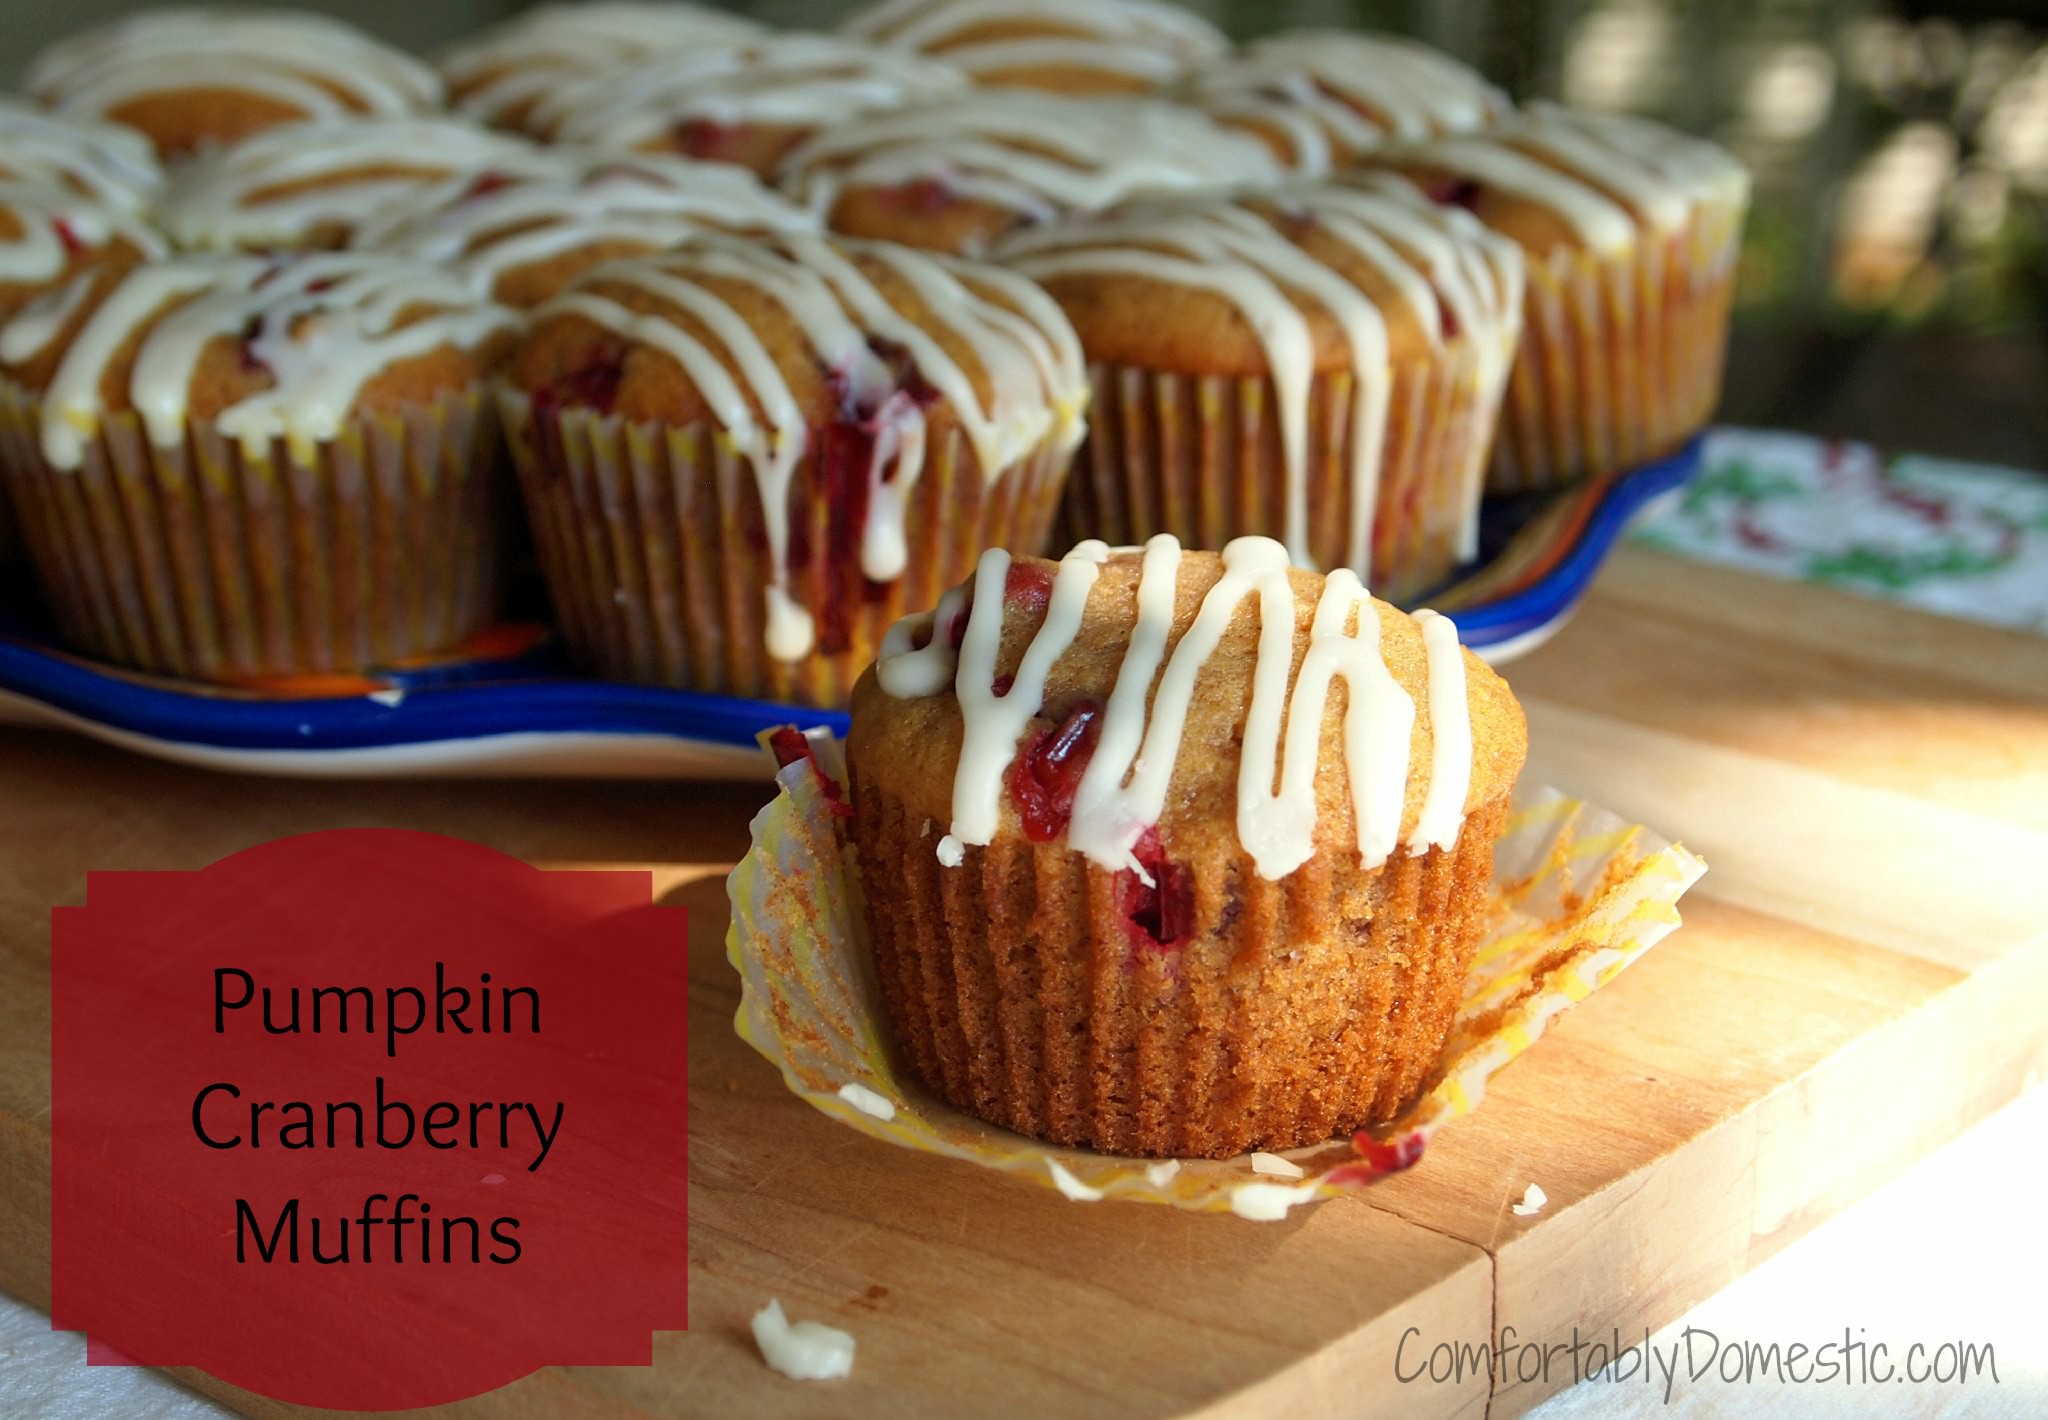 Pumpkin cranberry muffins  use the best flavors of fall to create a moist, fluffy muffin for breakfast or any time snack. The drizzle of sweet glaze on top takes them over the top. | ComfortablyDomestic.com